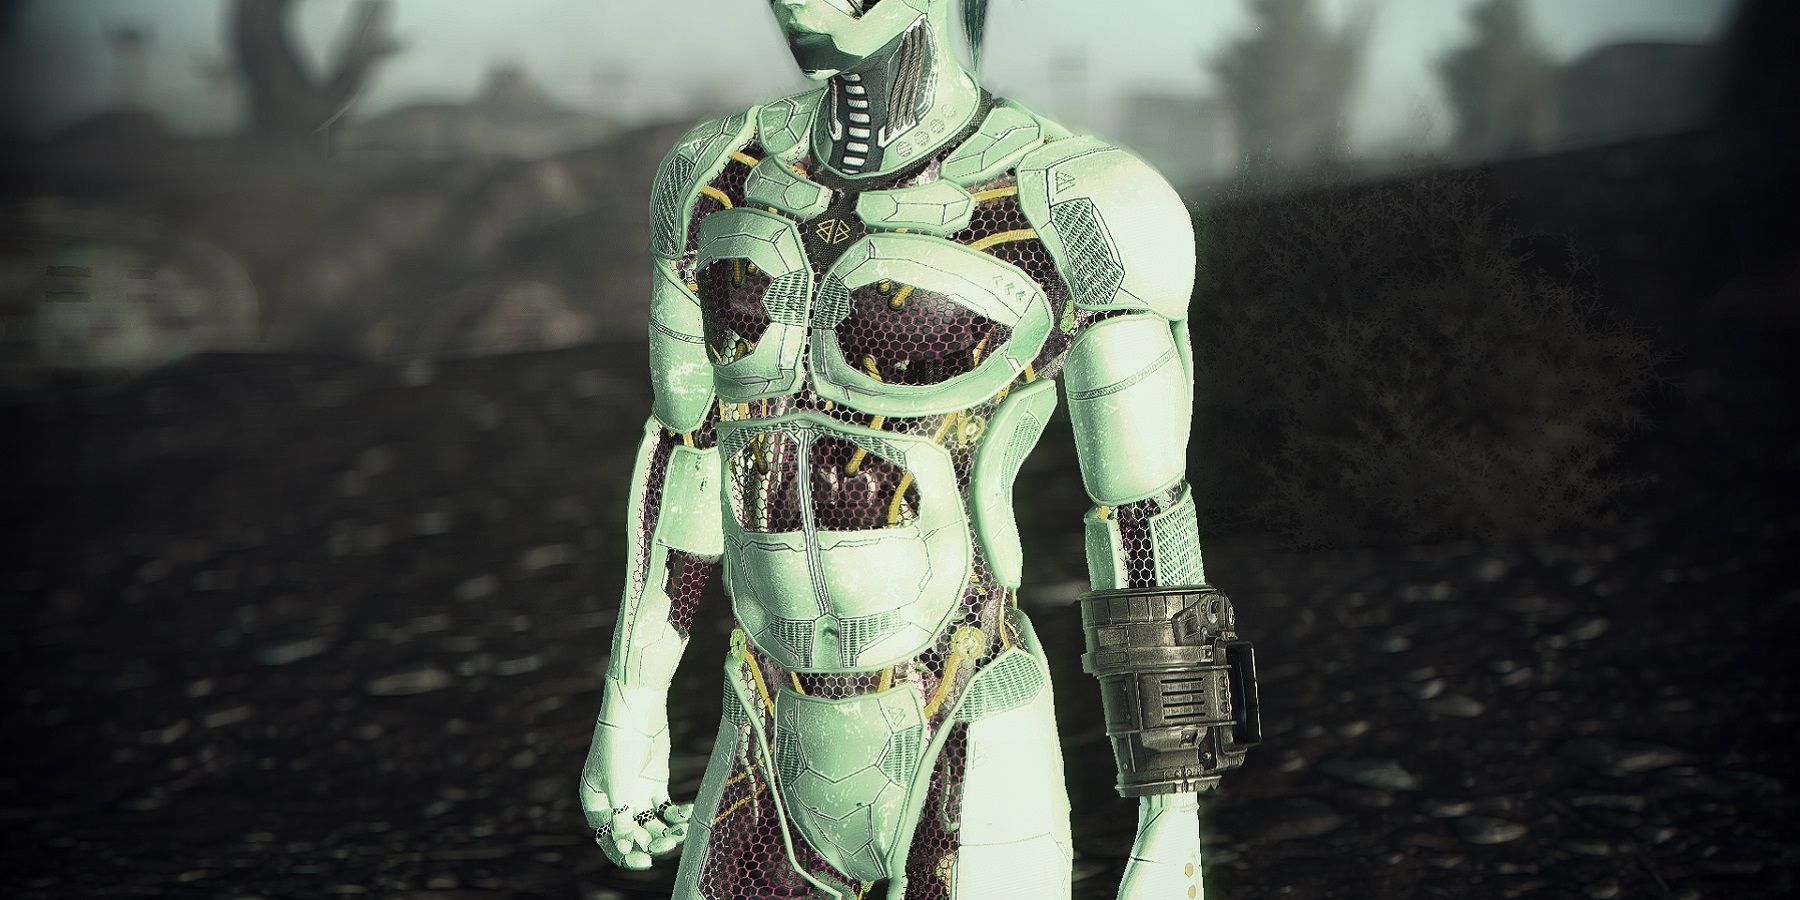 Image from Fallout: New Vegas showing a line green android character.